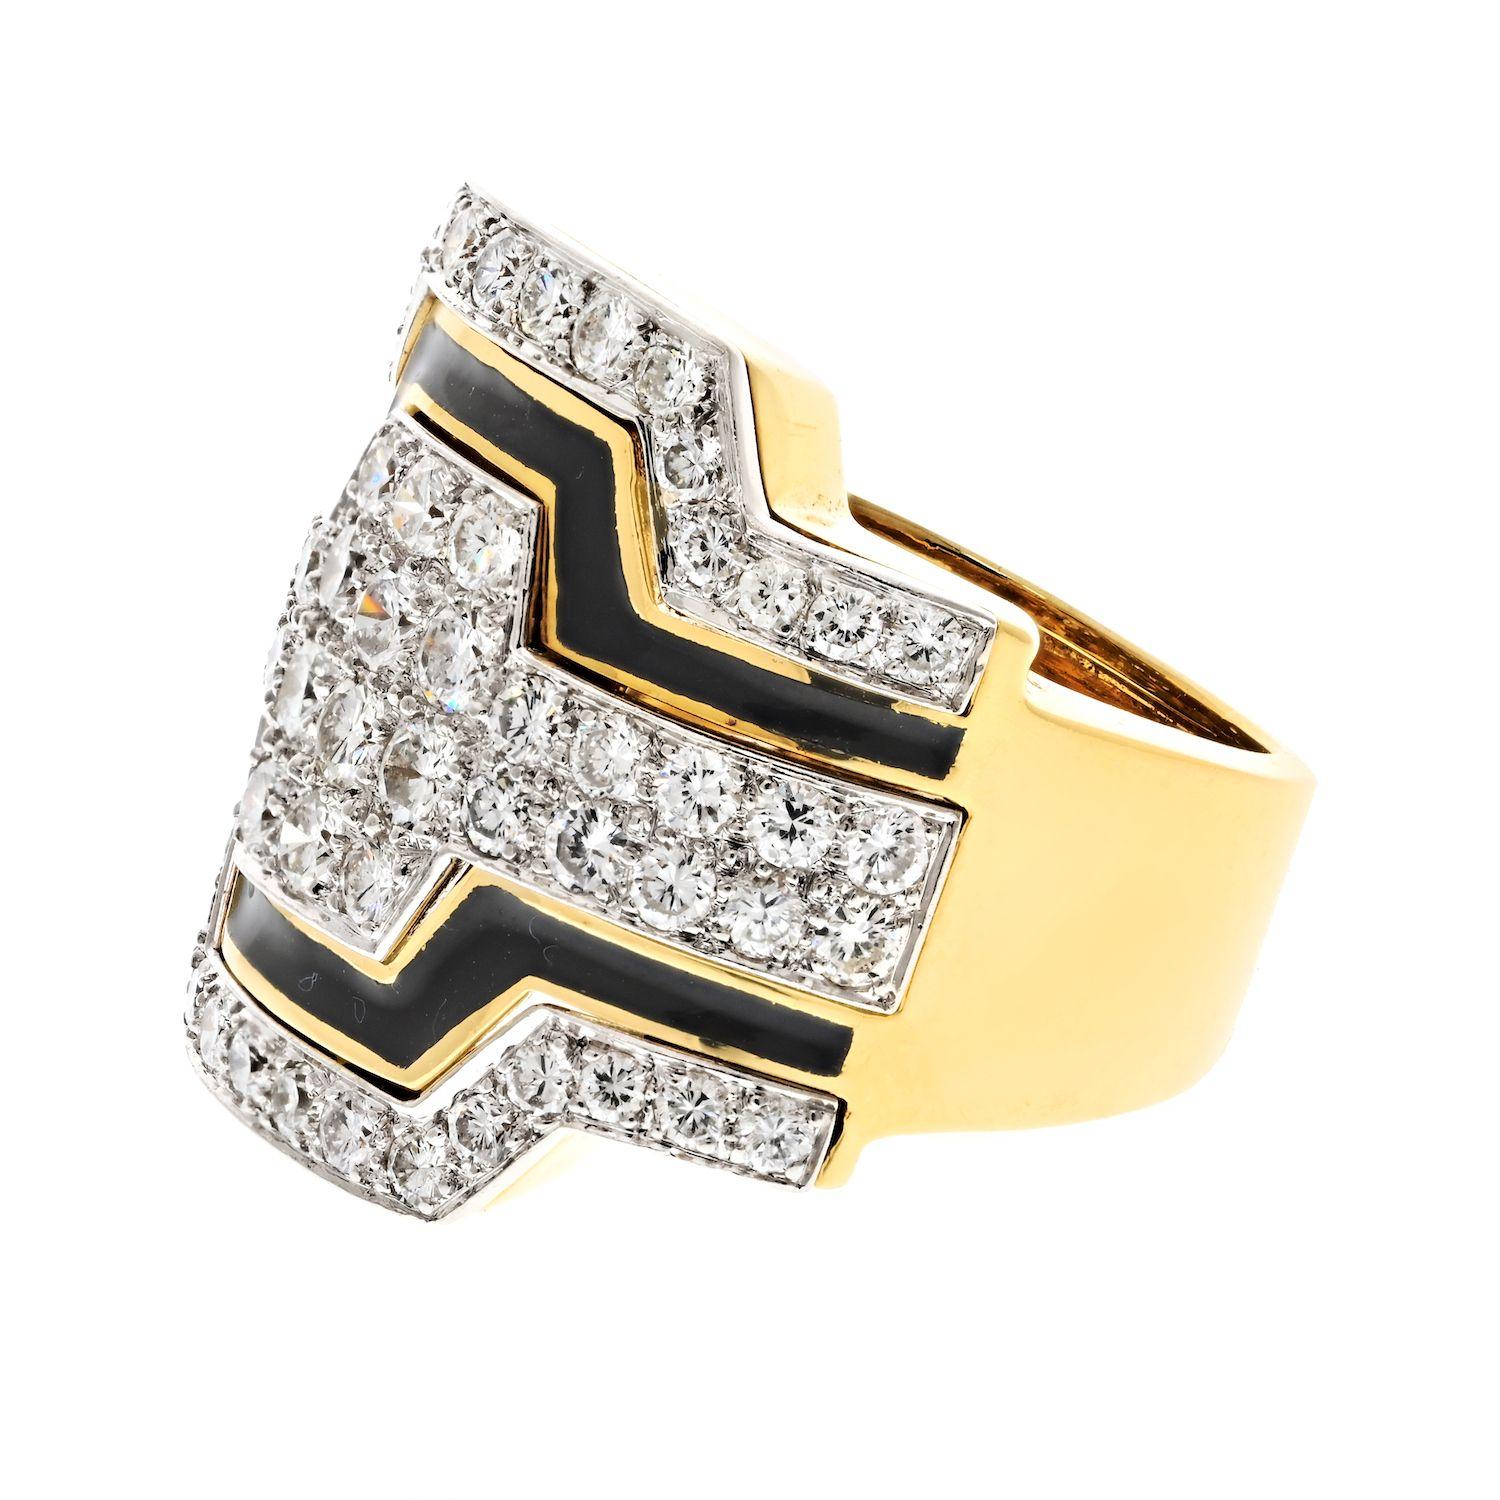 The David Webb Cigar Band Ring from the Manhattan Minimalism Collection is a stunning piece of jewelry that exudes elegance and sophistication. The ring features brilliant-cut diamonds, black enamel, 18K gold, and platinum, all meticulously crafted